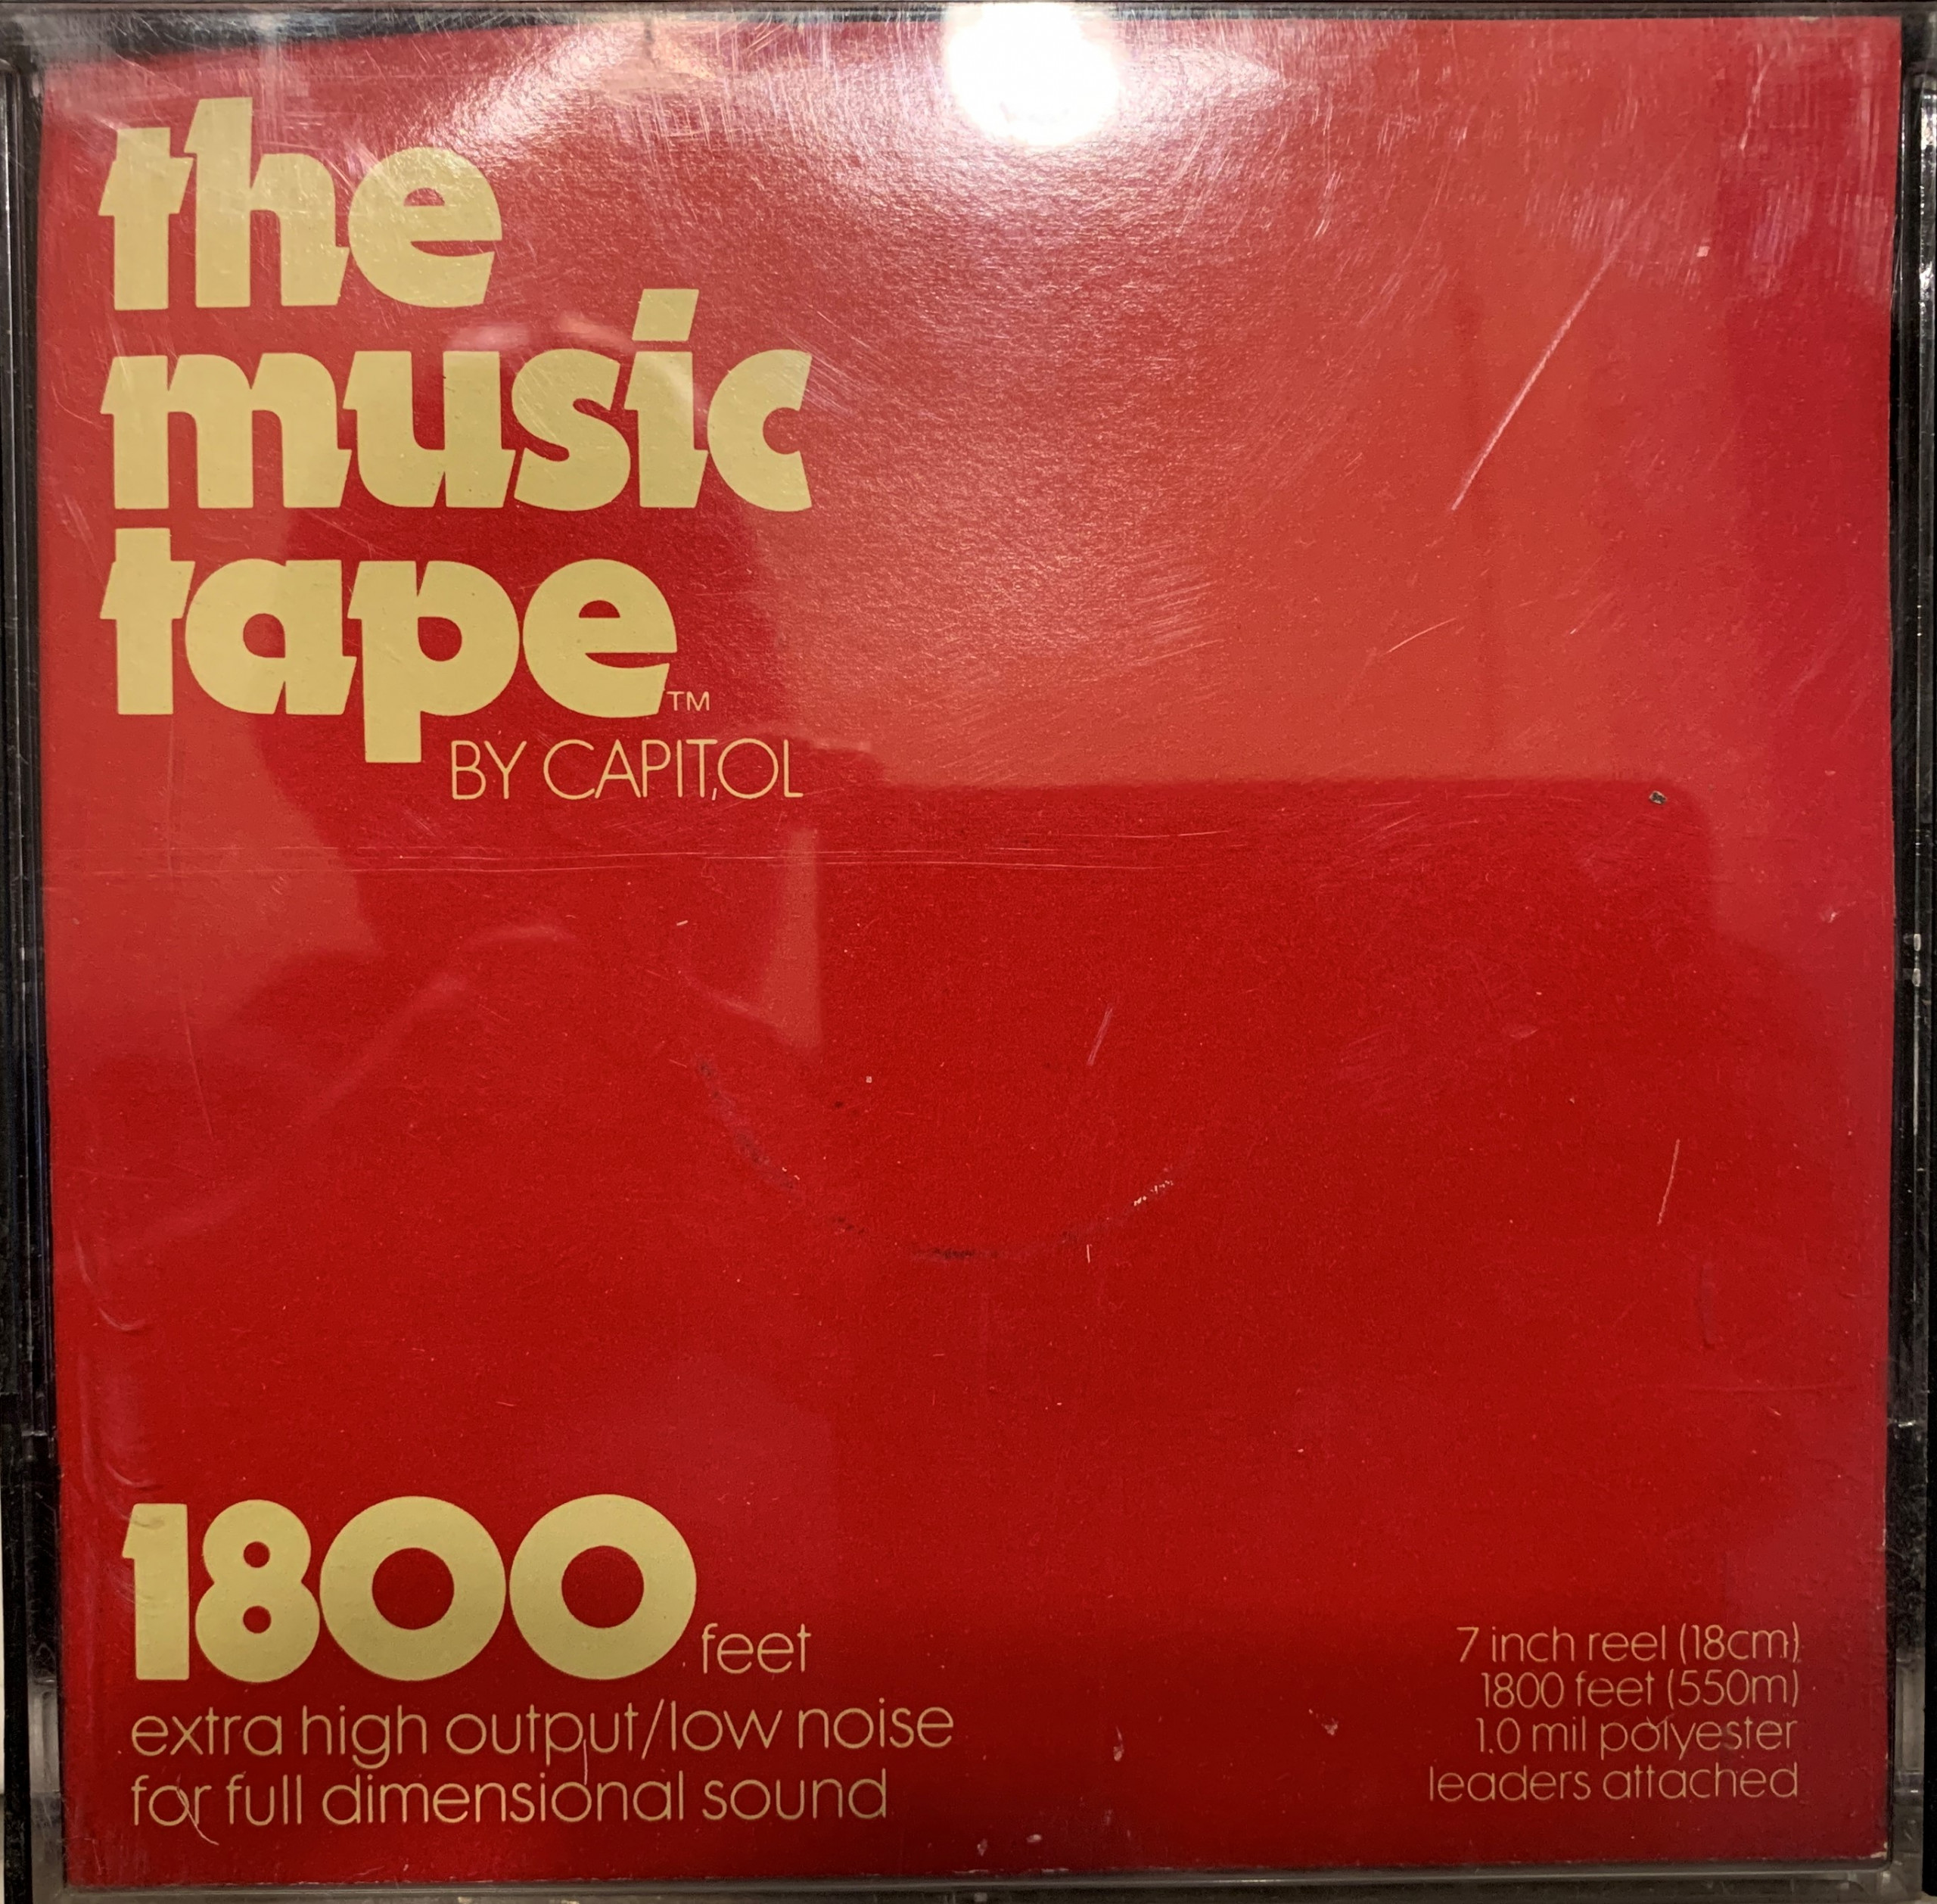 Capitol / Audiotape The Music Tape FDS, LP, 7″ Reel, 1800 ft